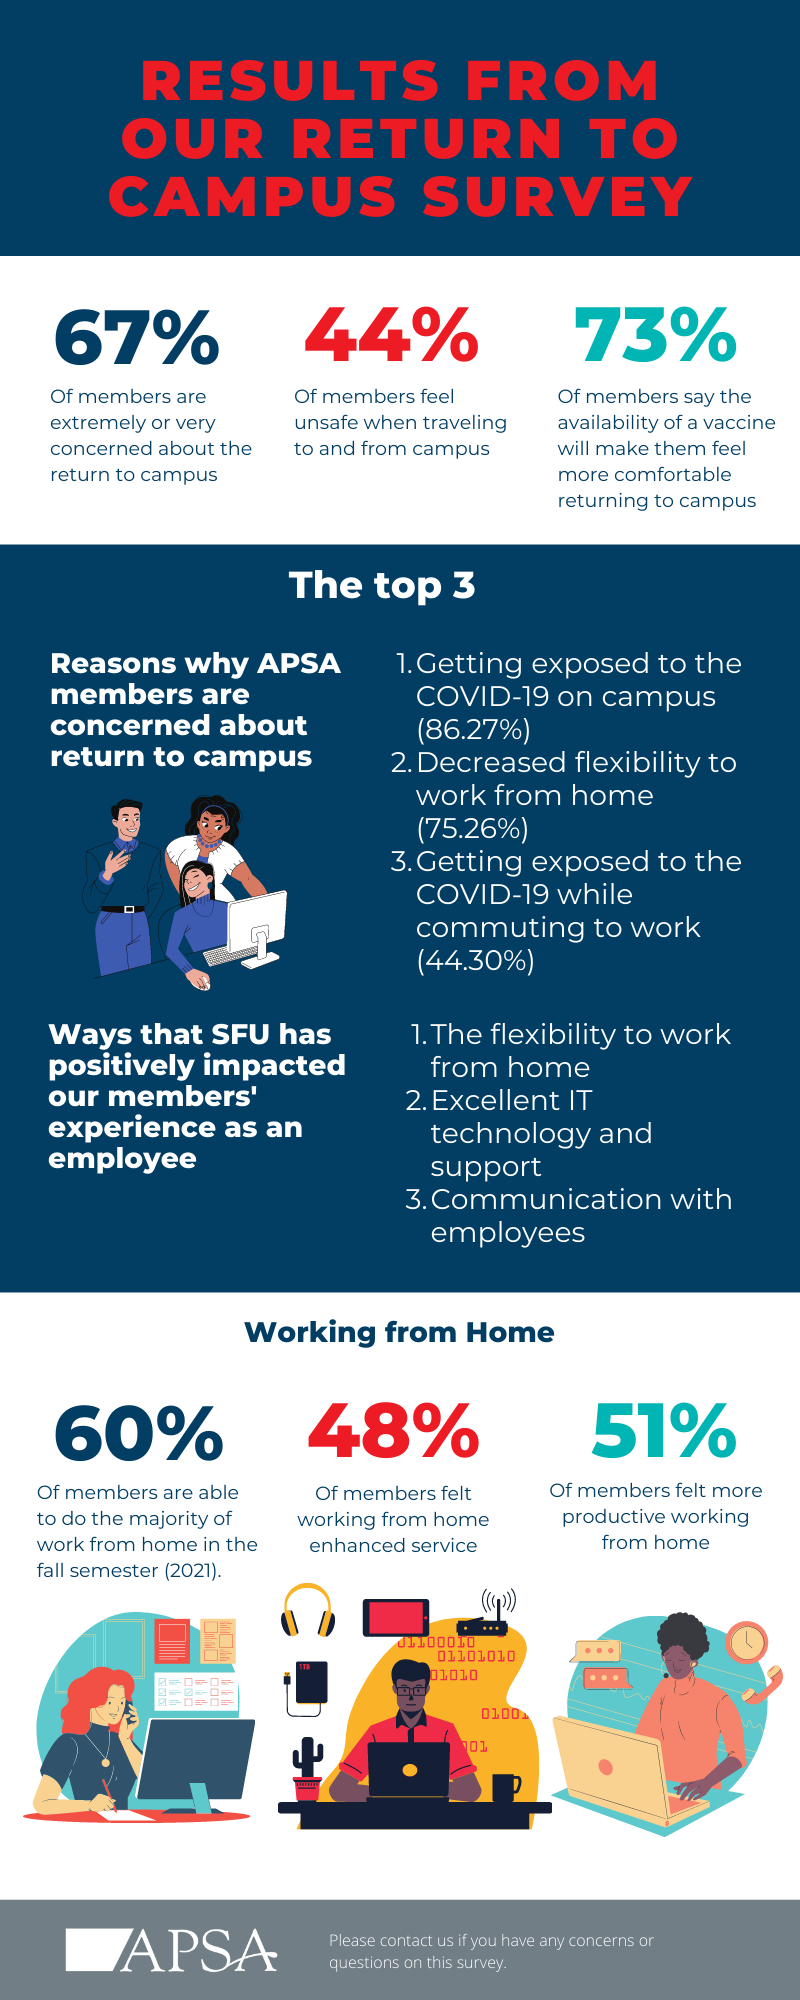 Results from Return to Campus Survey